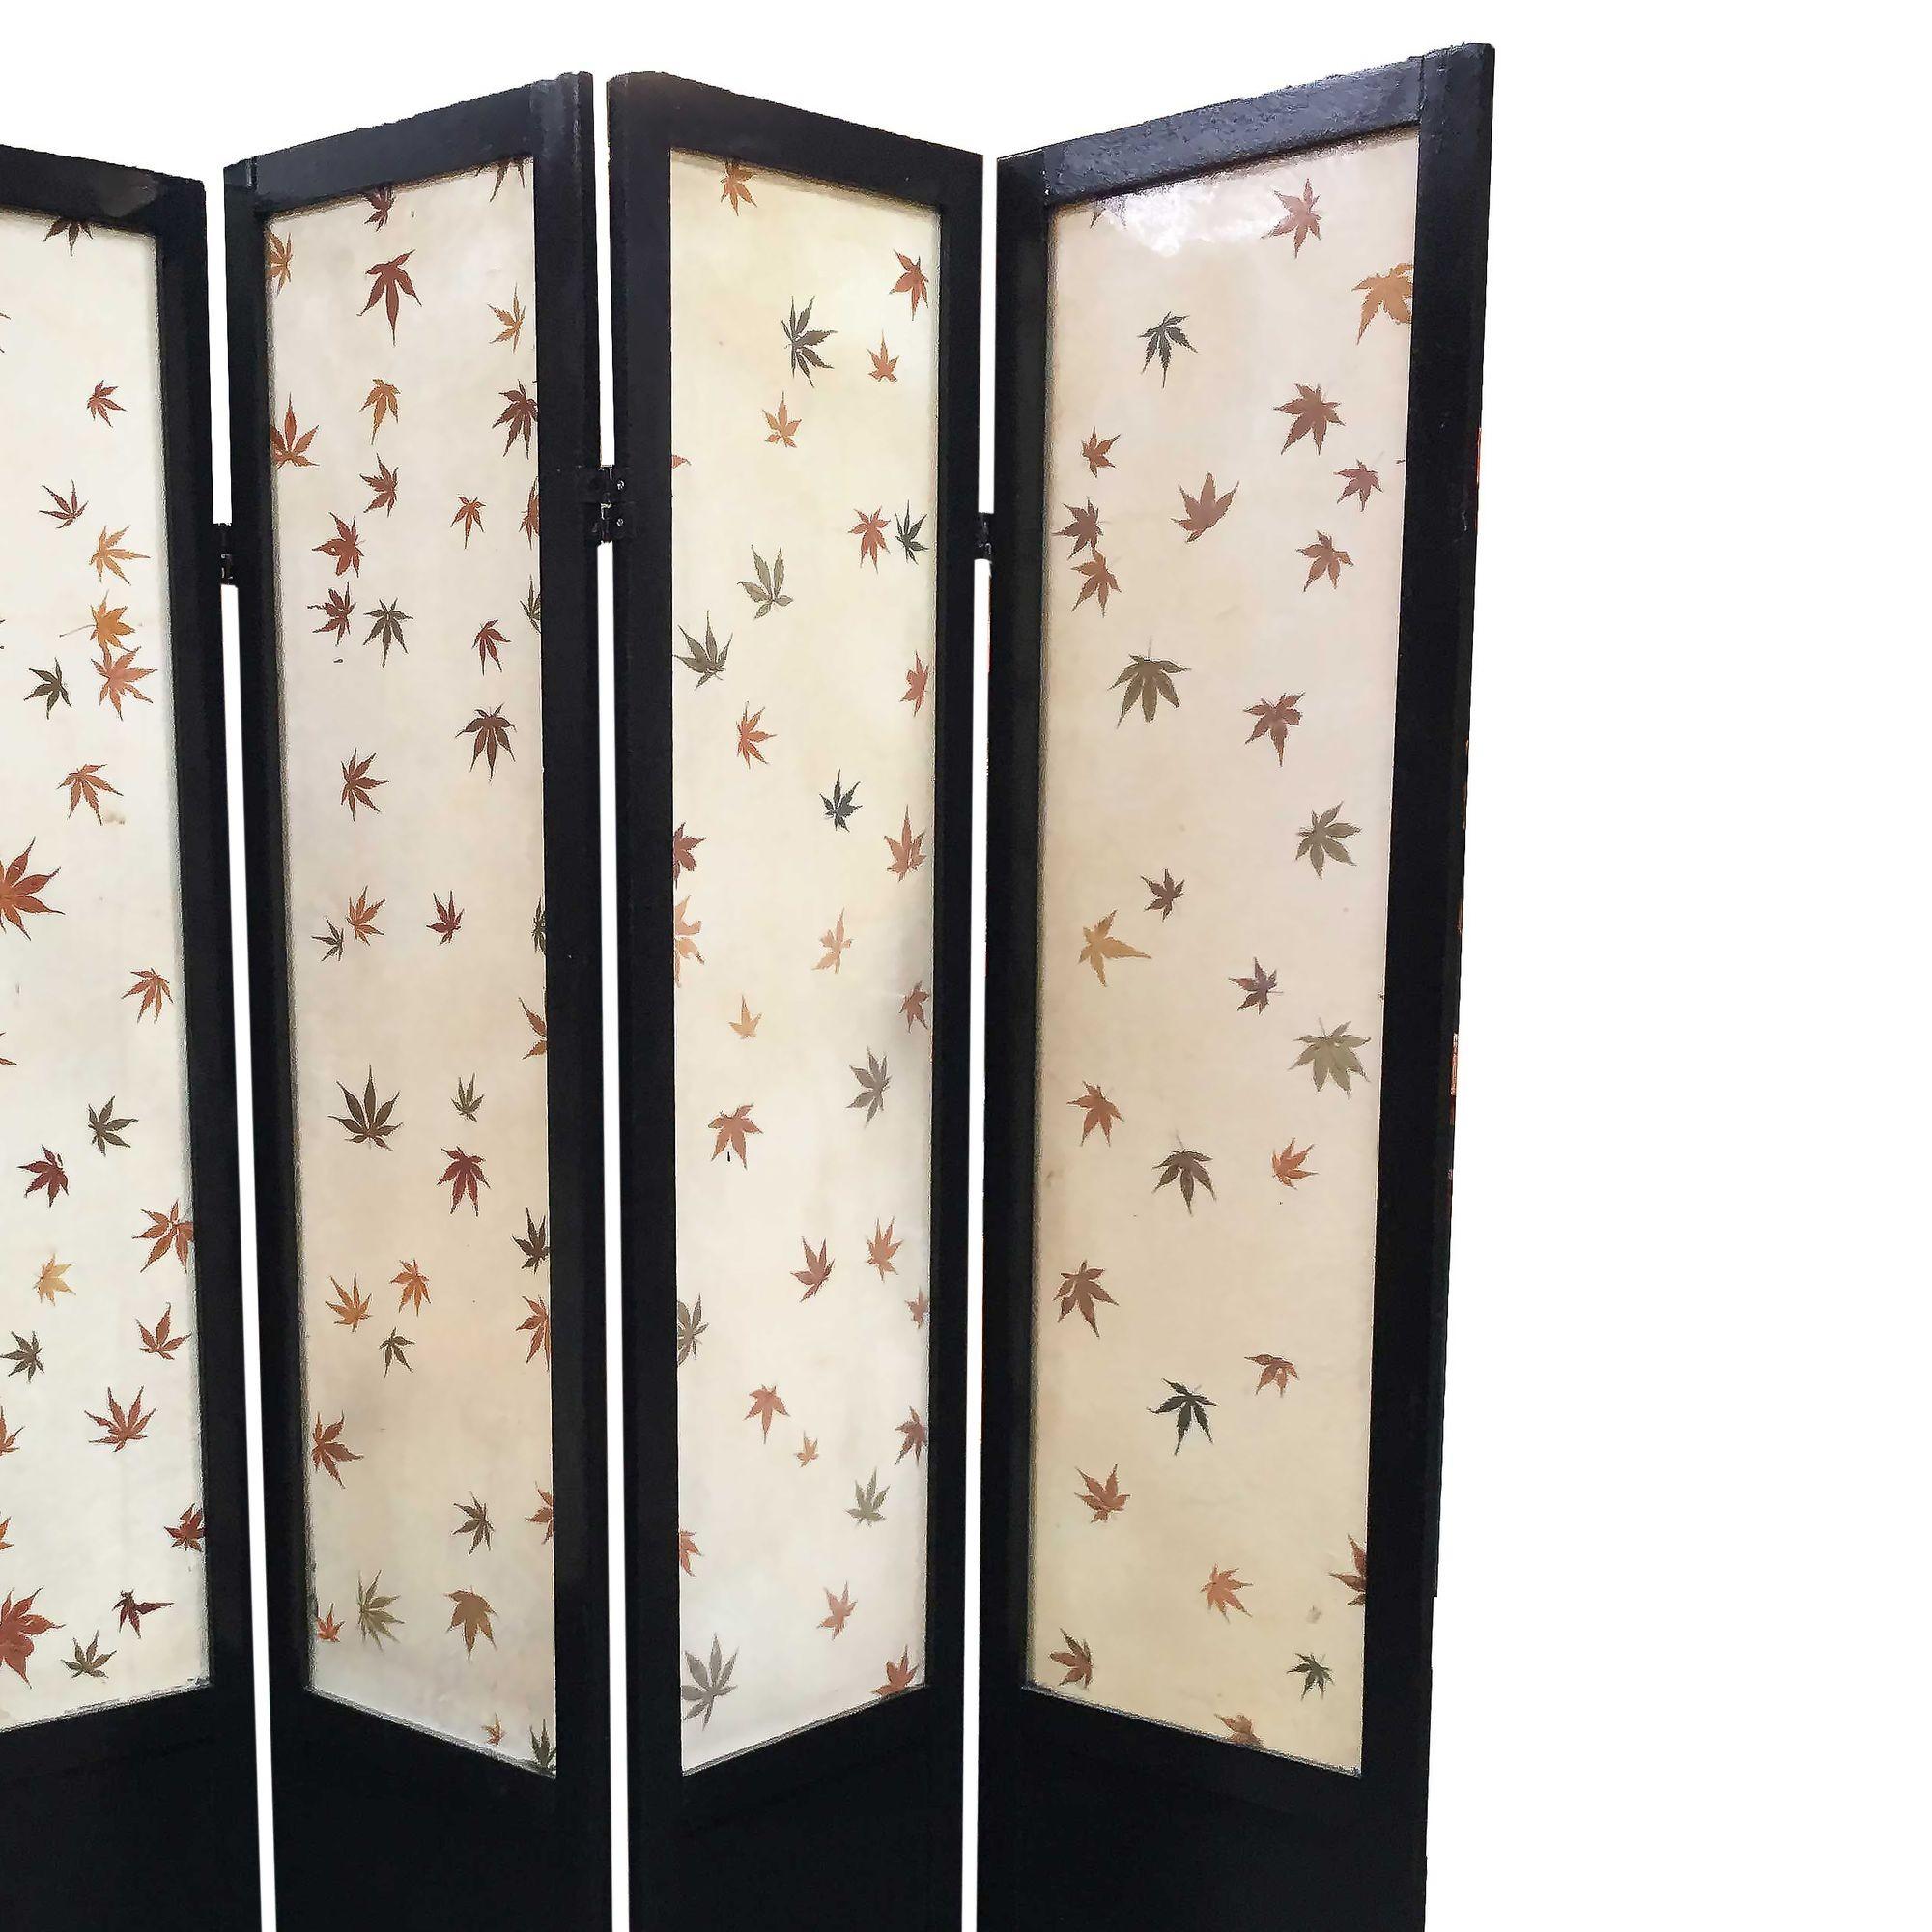 Black Lacquer Folding Screen w/ Fiberglass Maple Leaf Inserts In Excellent Condition For Sale In Van Nuys, CA